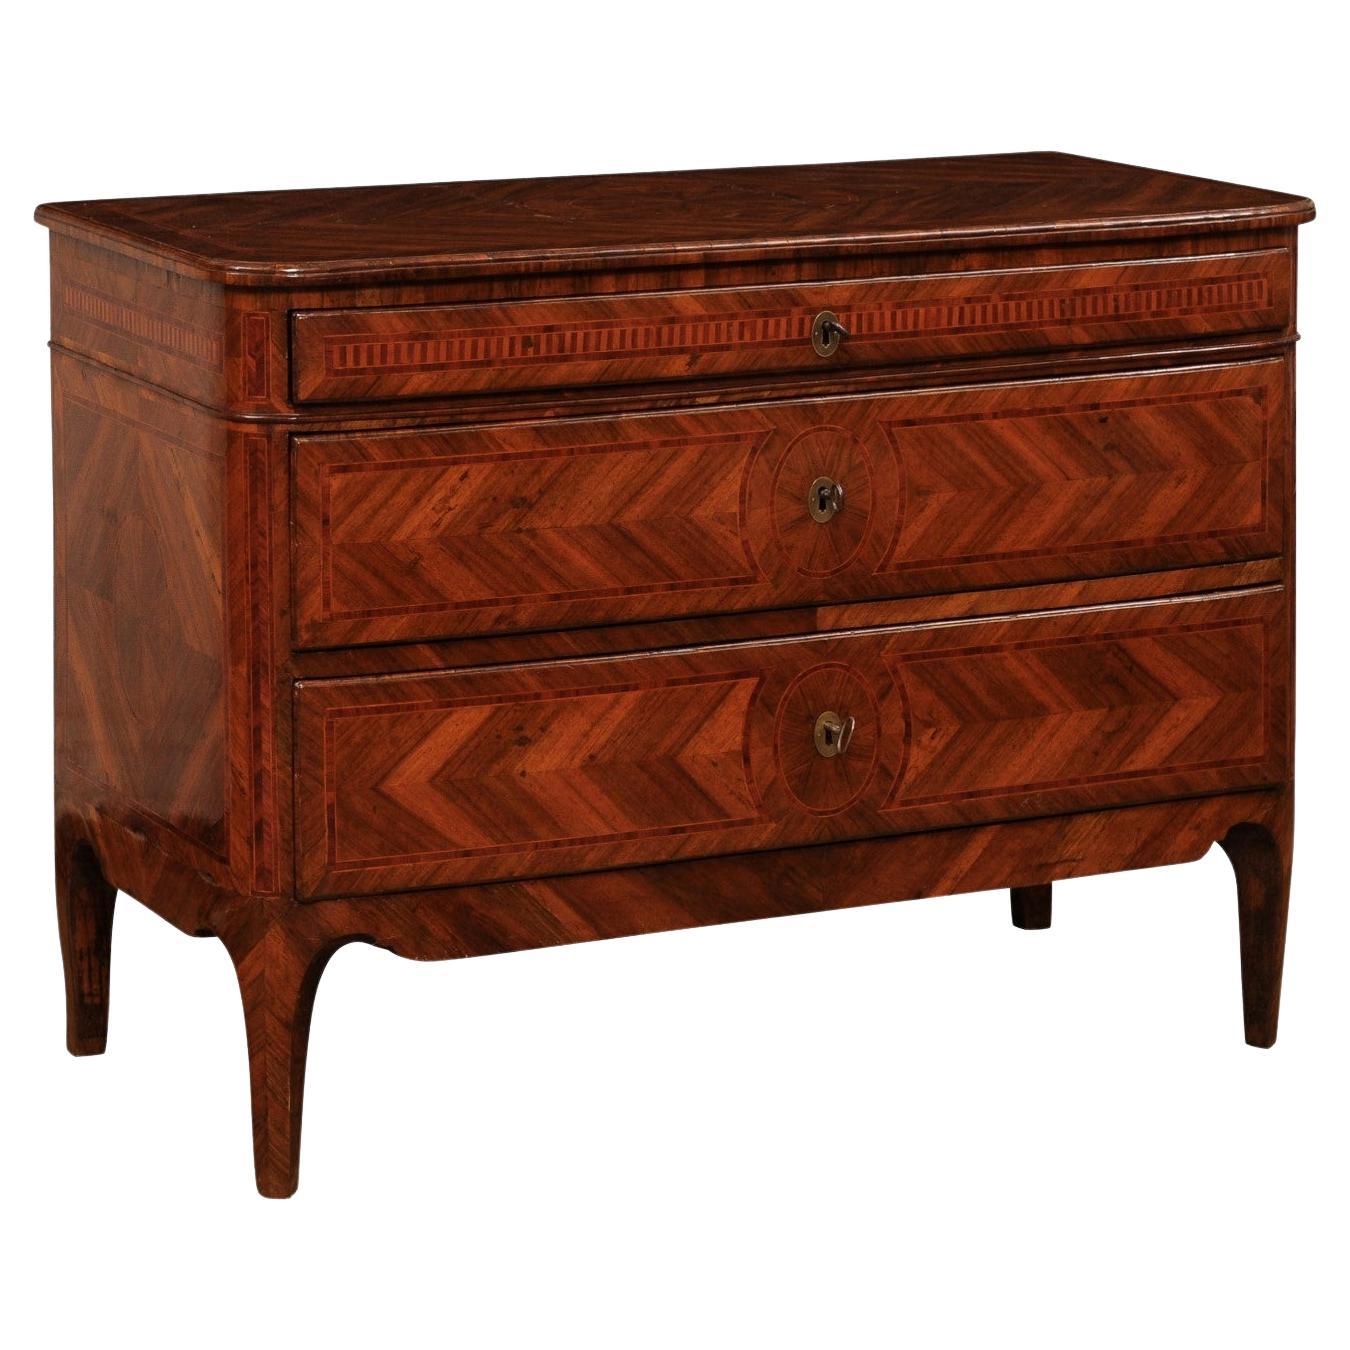 Italian 18th Century Walnut, Mahogany and Cherry Three-Drawer Marquetry Commode For Sale